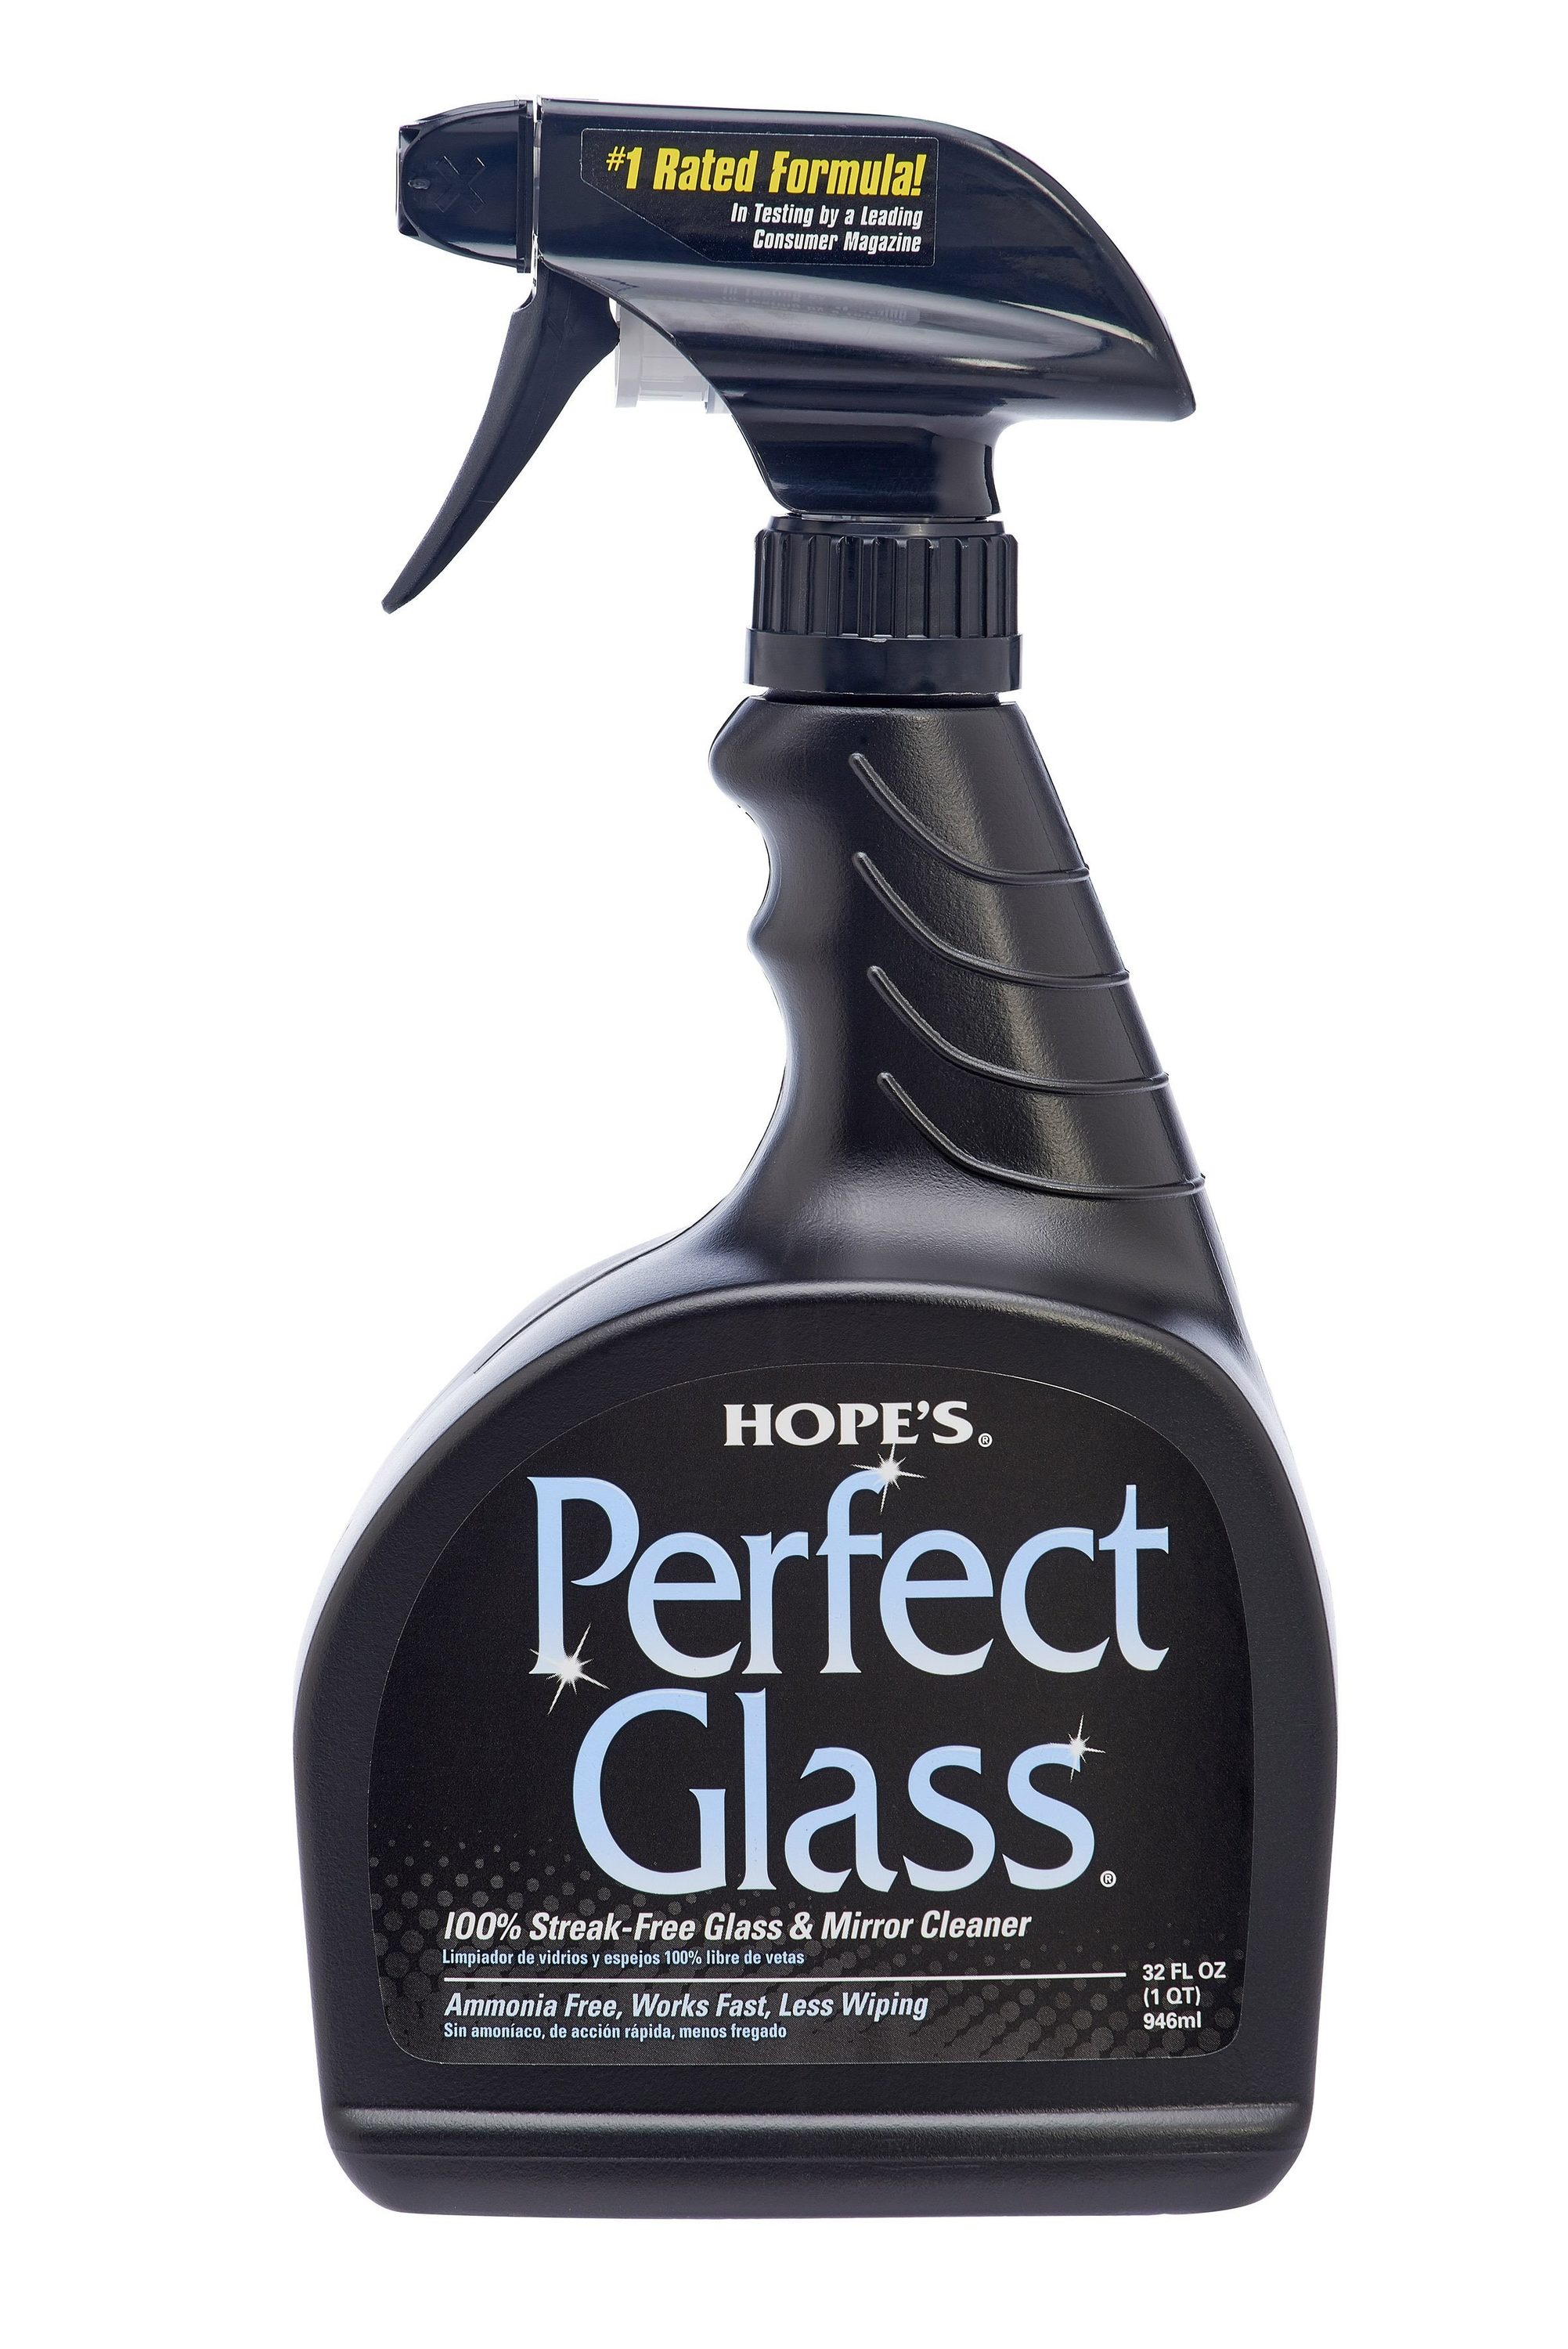 I'm a housekeeper - the 5 products I swear by, including a $3 glass cleaner